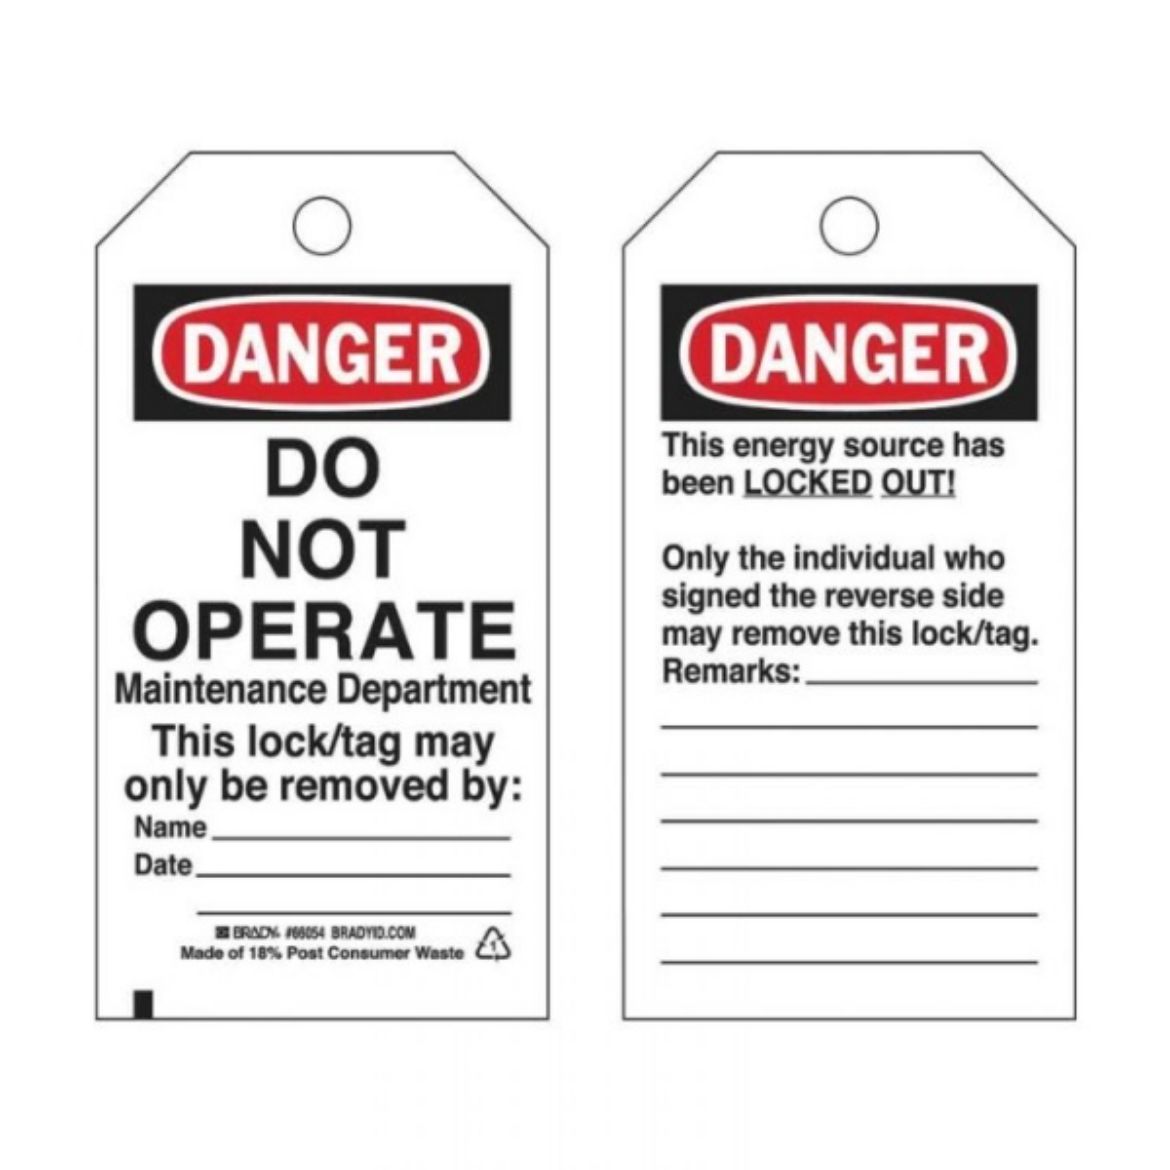 Picture of DANGER DO NOT OPERATE LOCKOUT TAGS - REVERSE SIDE ONLY THE INDIVIDUAL WHO, HEAVY DUTY POLYESTER